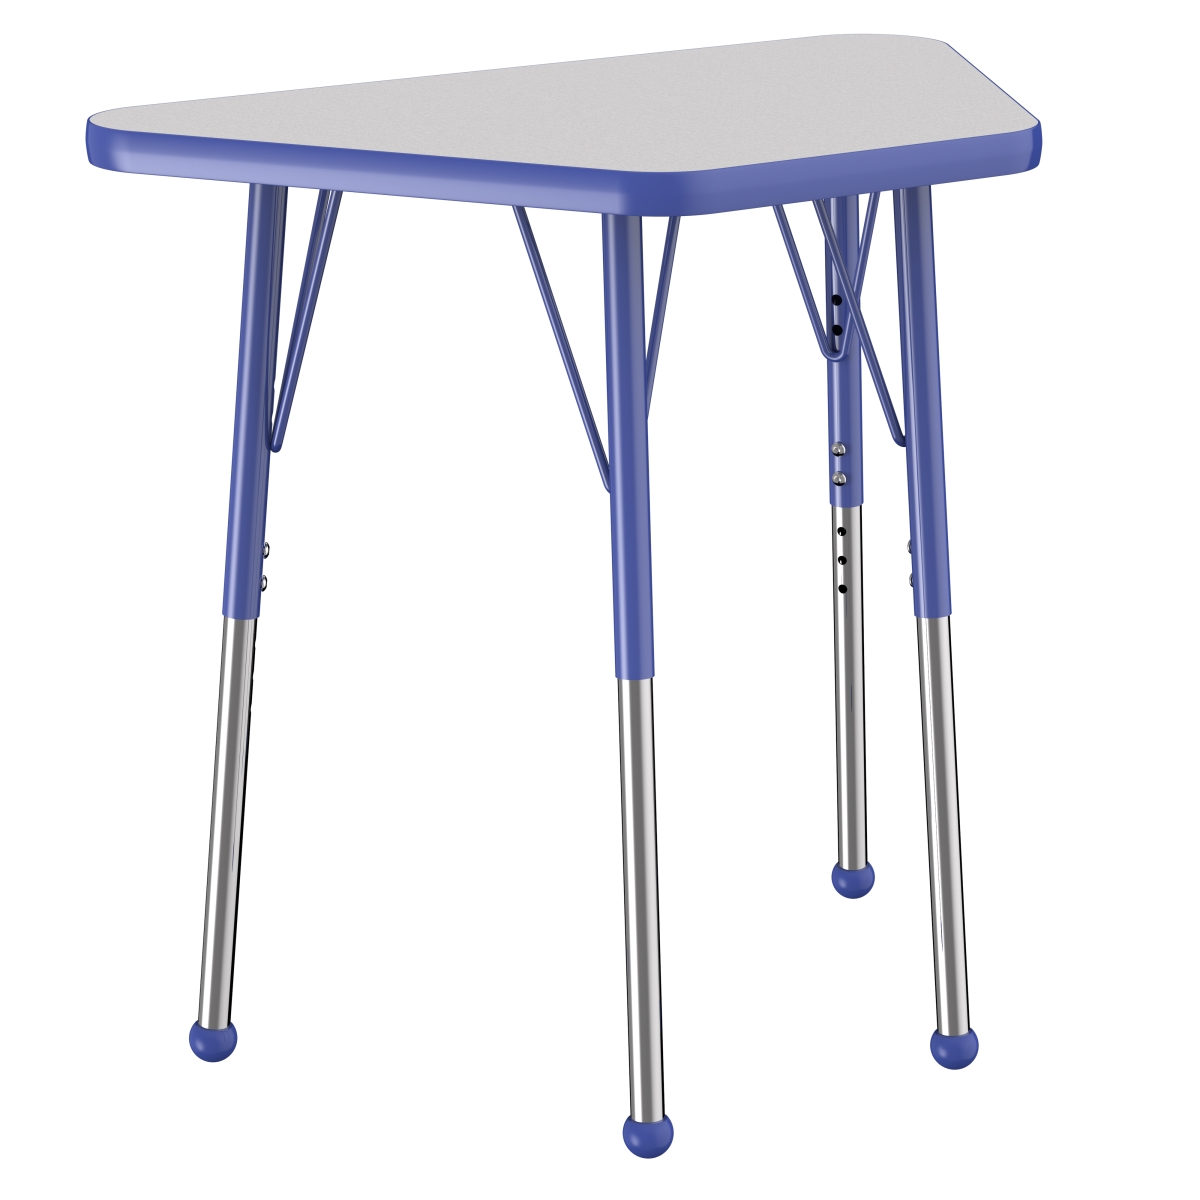 10064-gybl 18 X 30 In. Trapezoid T-mold Adjustable Activity Table With Standard Ball - Grey & Blue